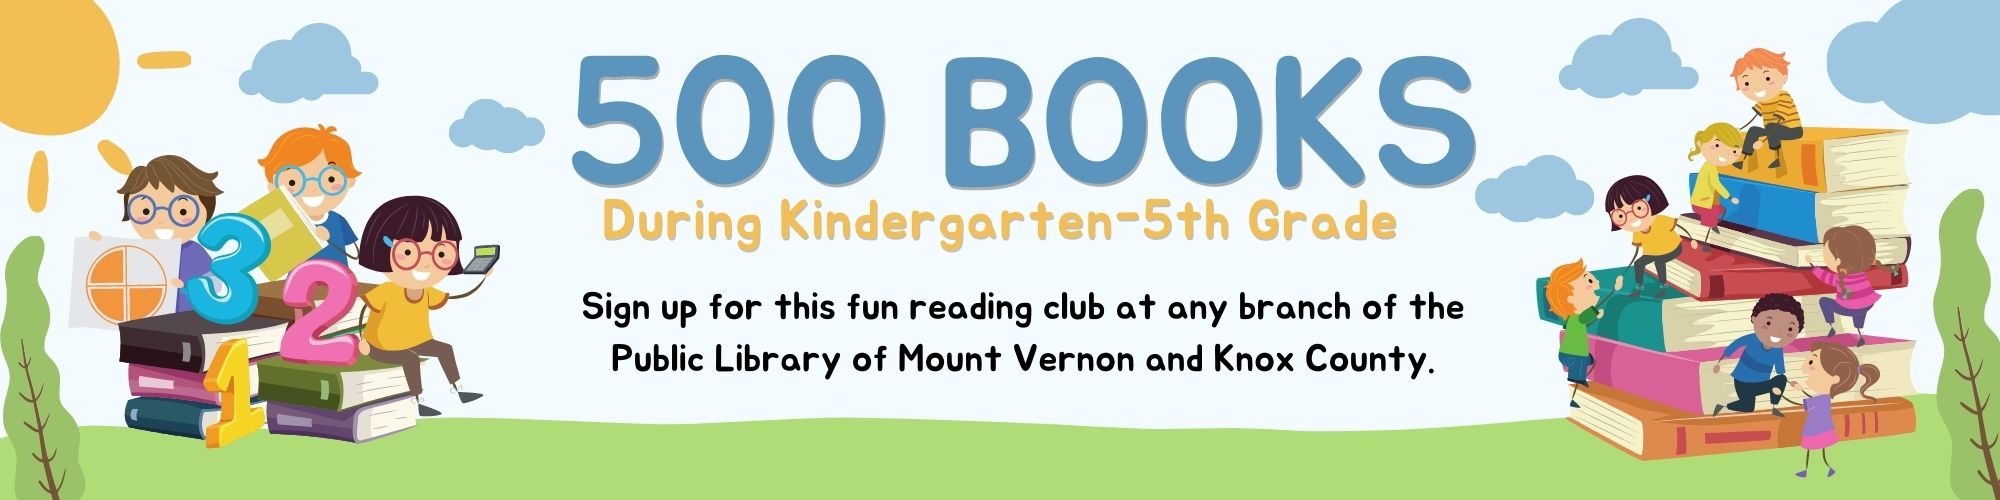 500 Books during Kindergarten-5th grade. Sign up for this fun reading club at any branch of the Public Library of Mount Vernon and Knox County.